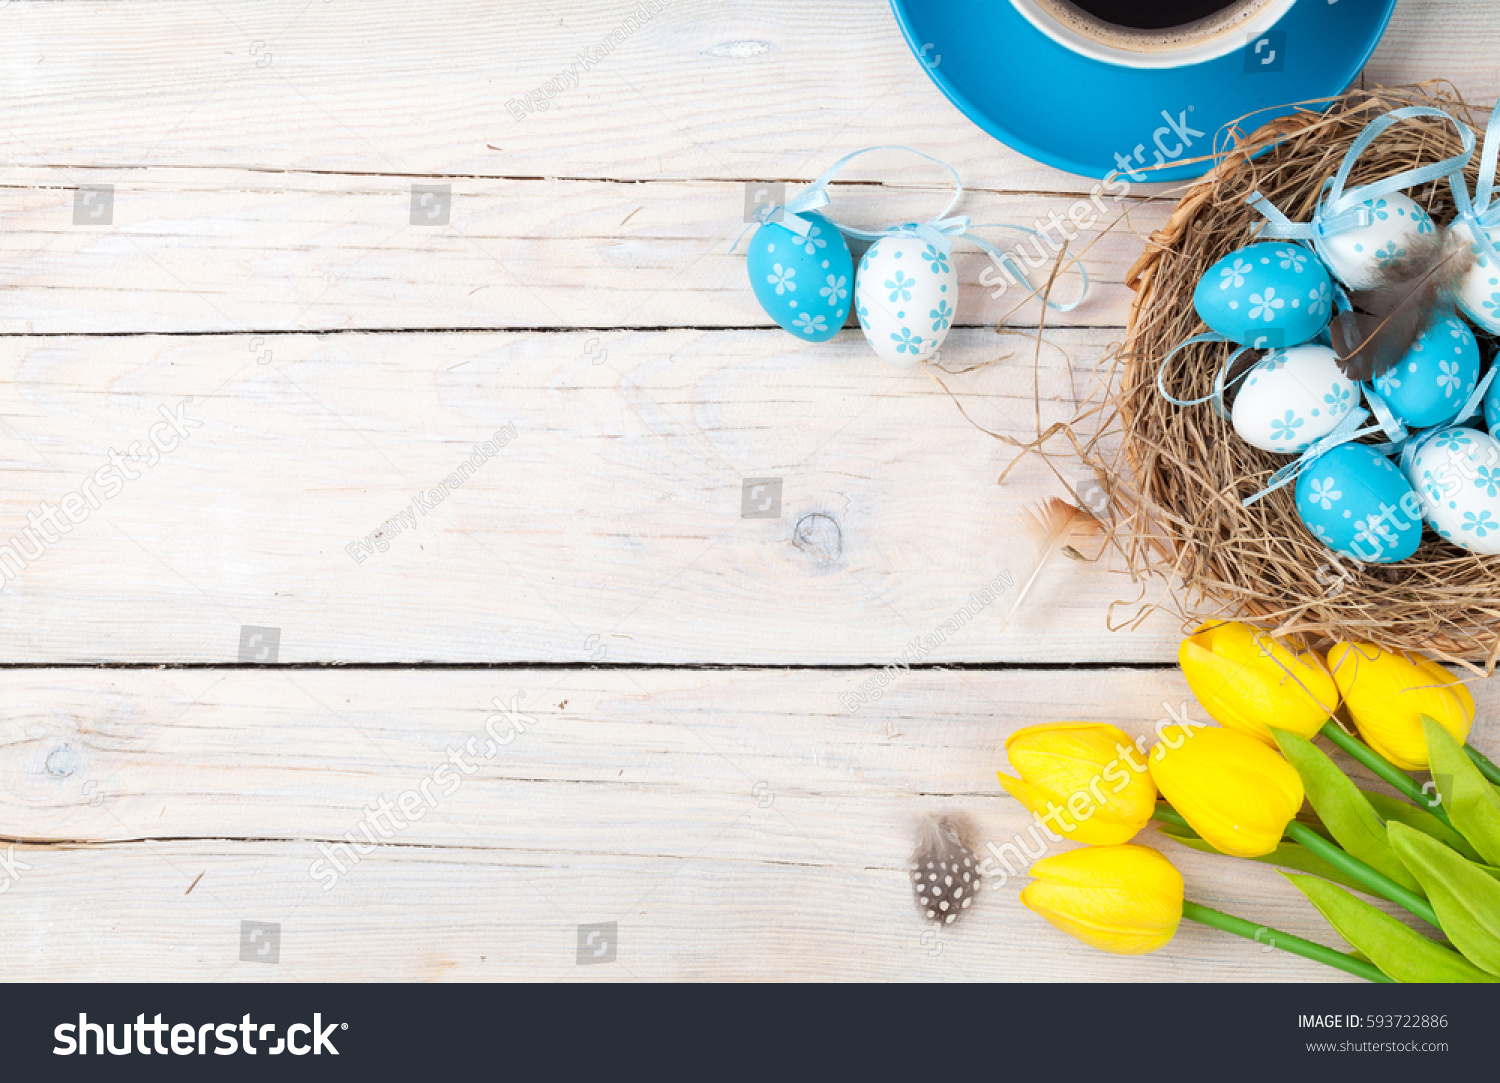 Easter background with blue and white eggs in nest, yellow tulips and coffee cup over white wood. Top view with copy space #593722886